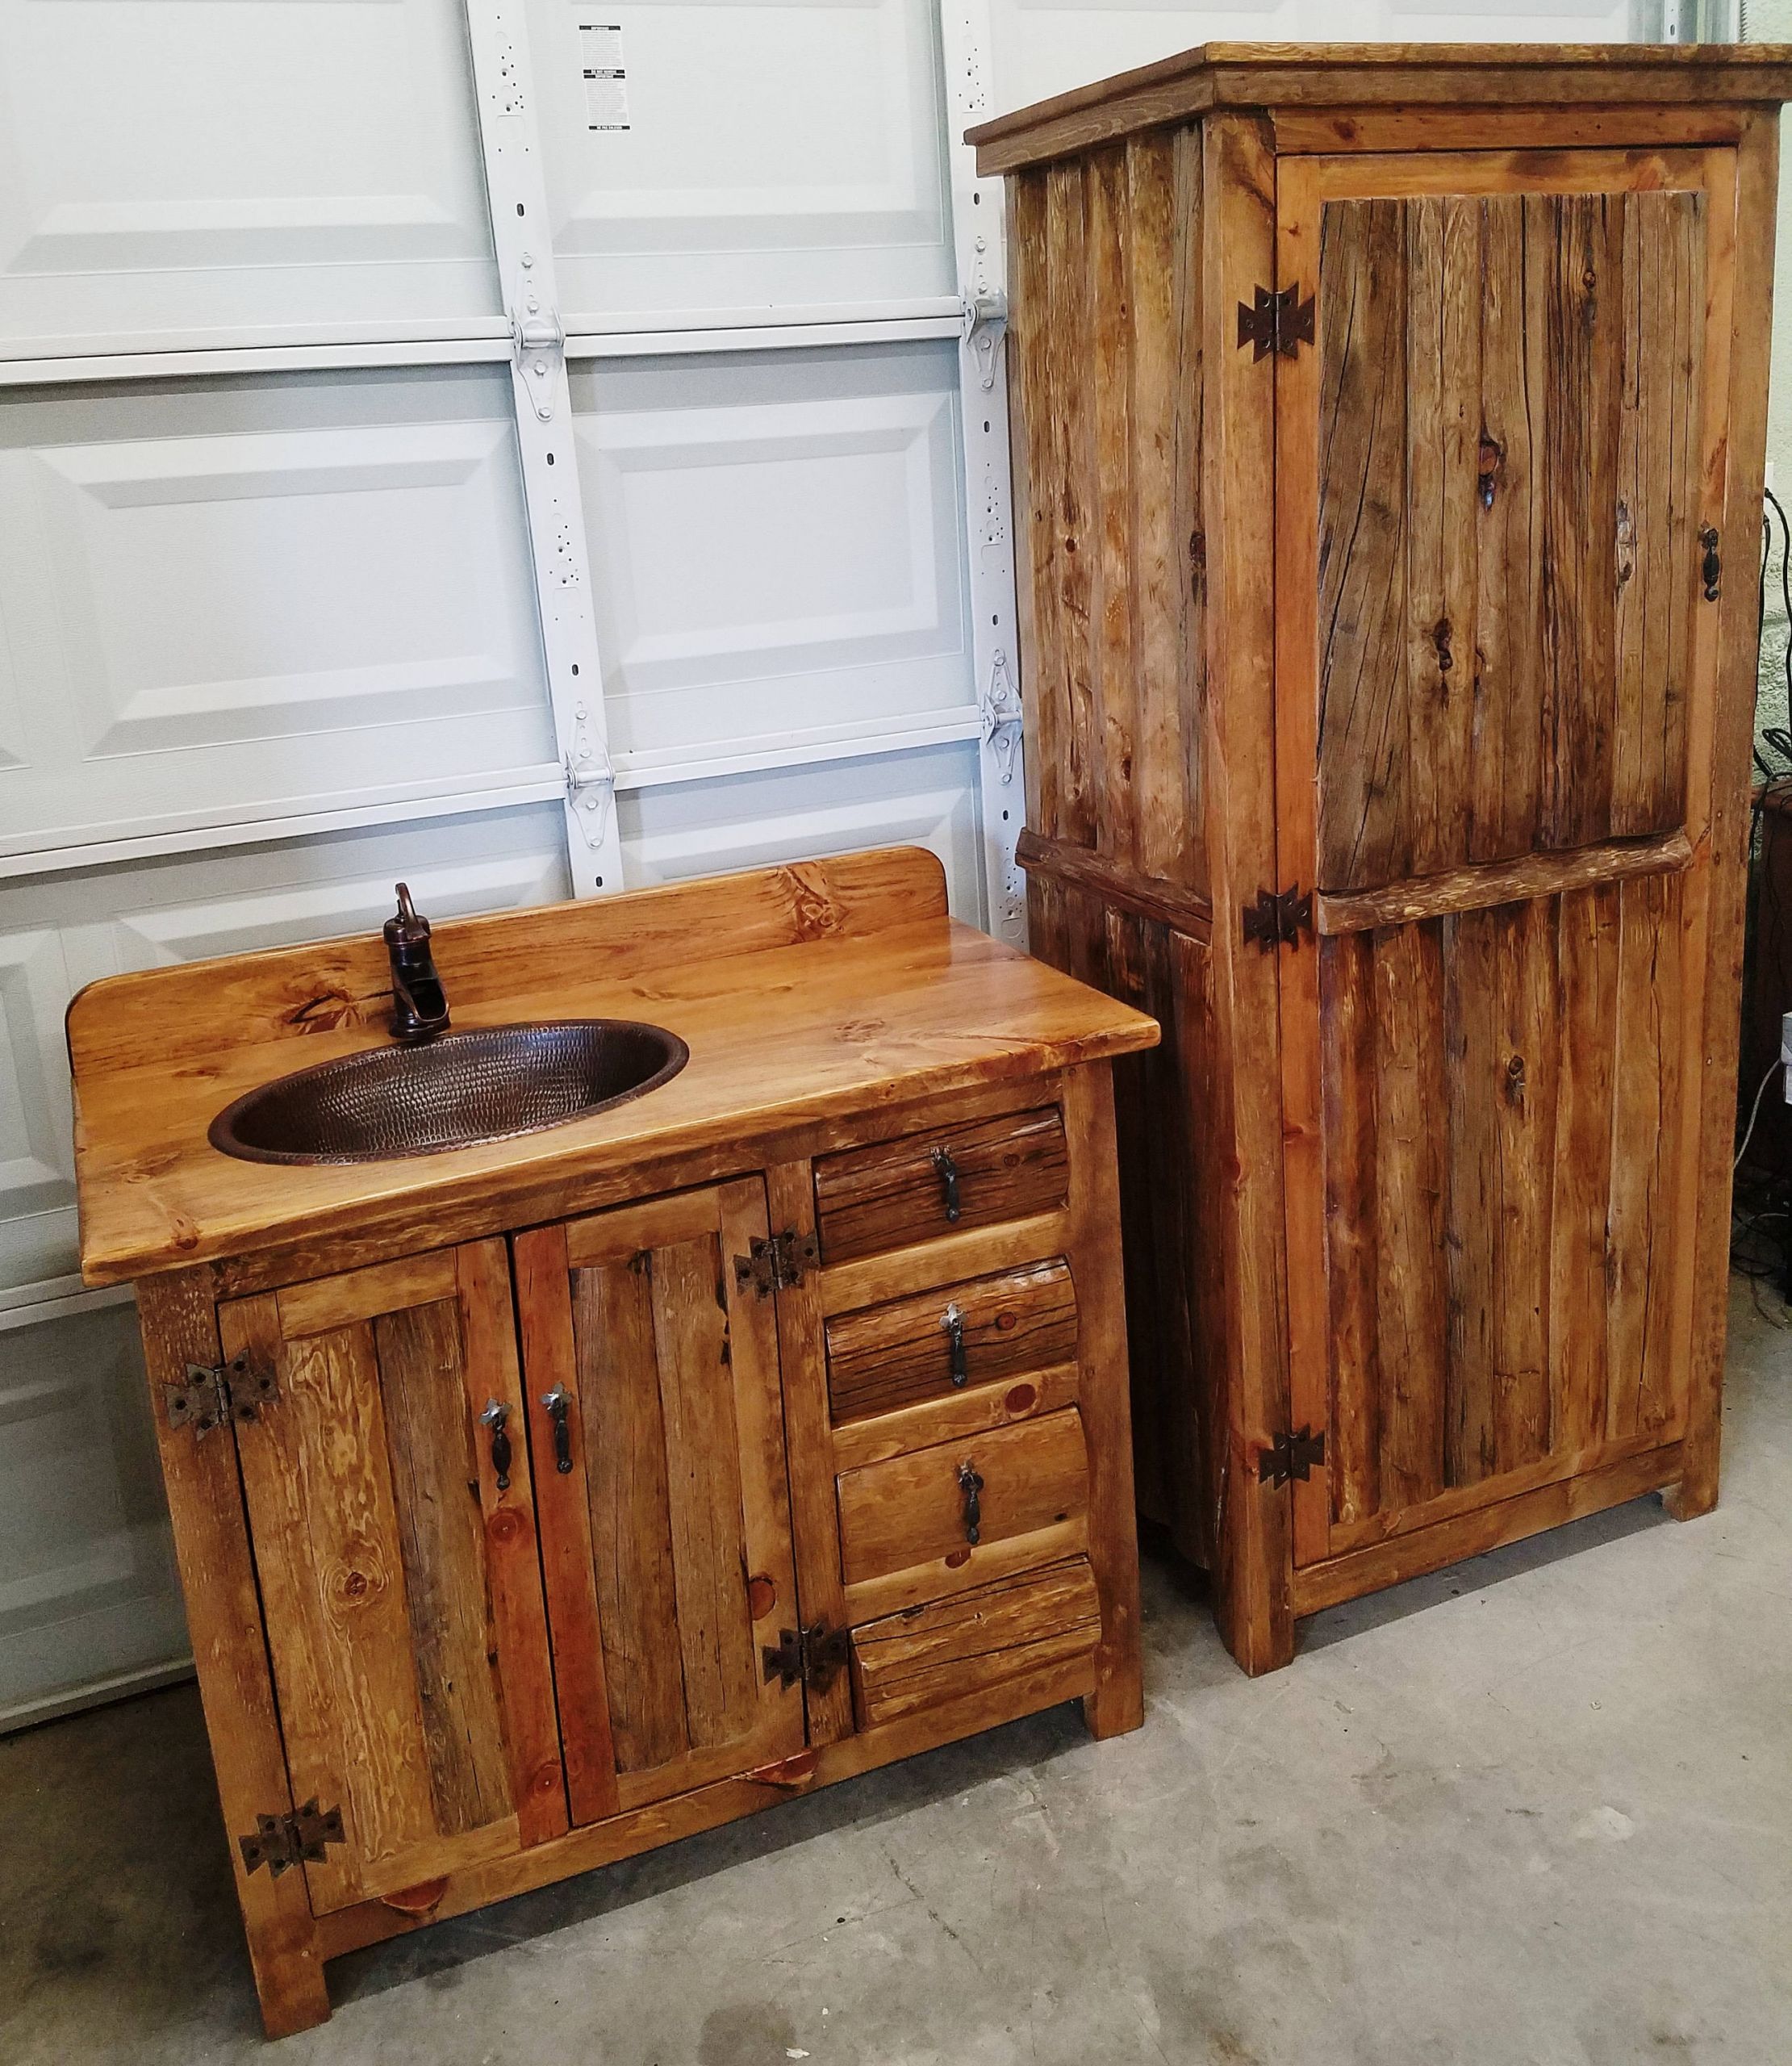 Rustic Bathroom Storage Cabinets
 Rustic Linen Cabinet for Rustic Bathrooms 72 tall 33